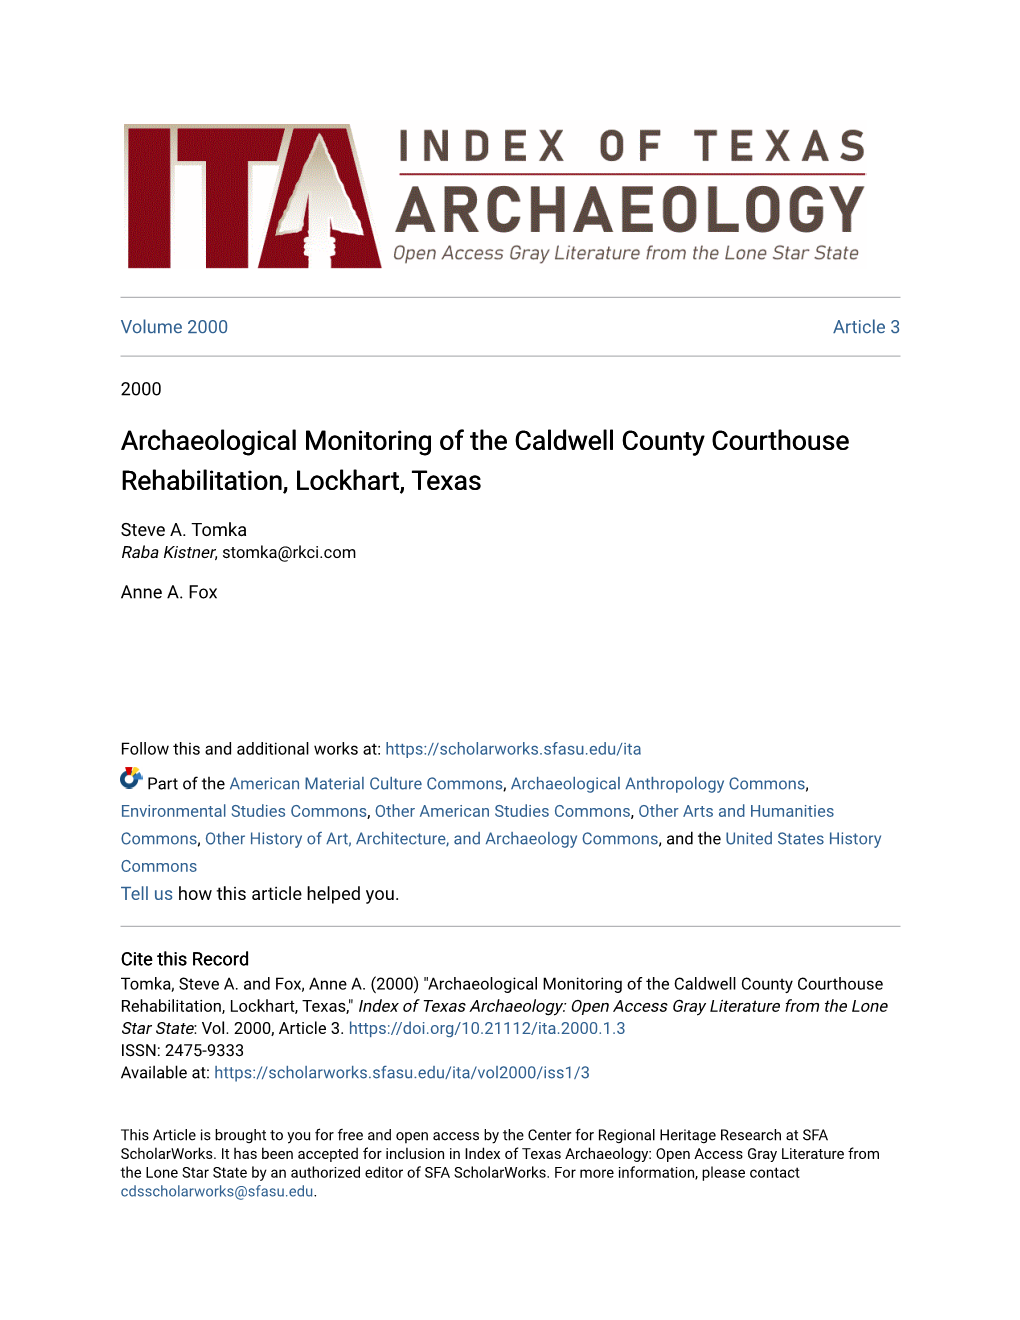 Archaeological Monitoring of the Caldwell County Courthouse Rehabilitation, Lockhart, Texas